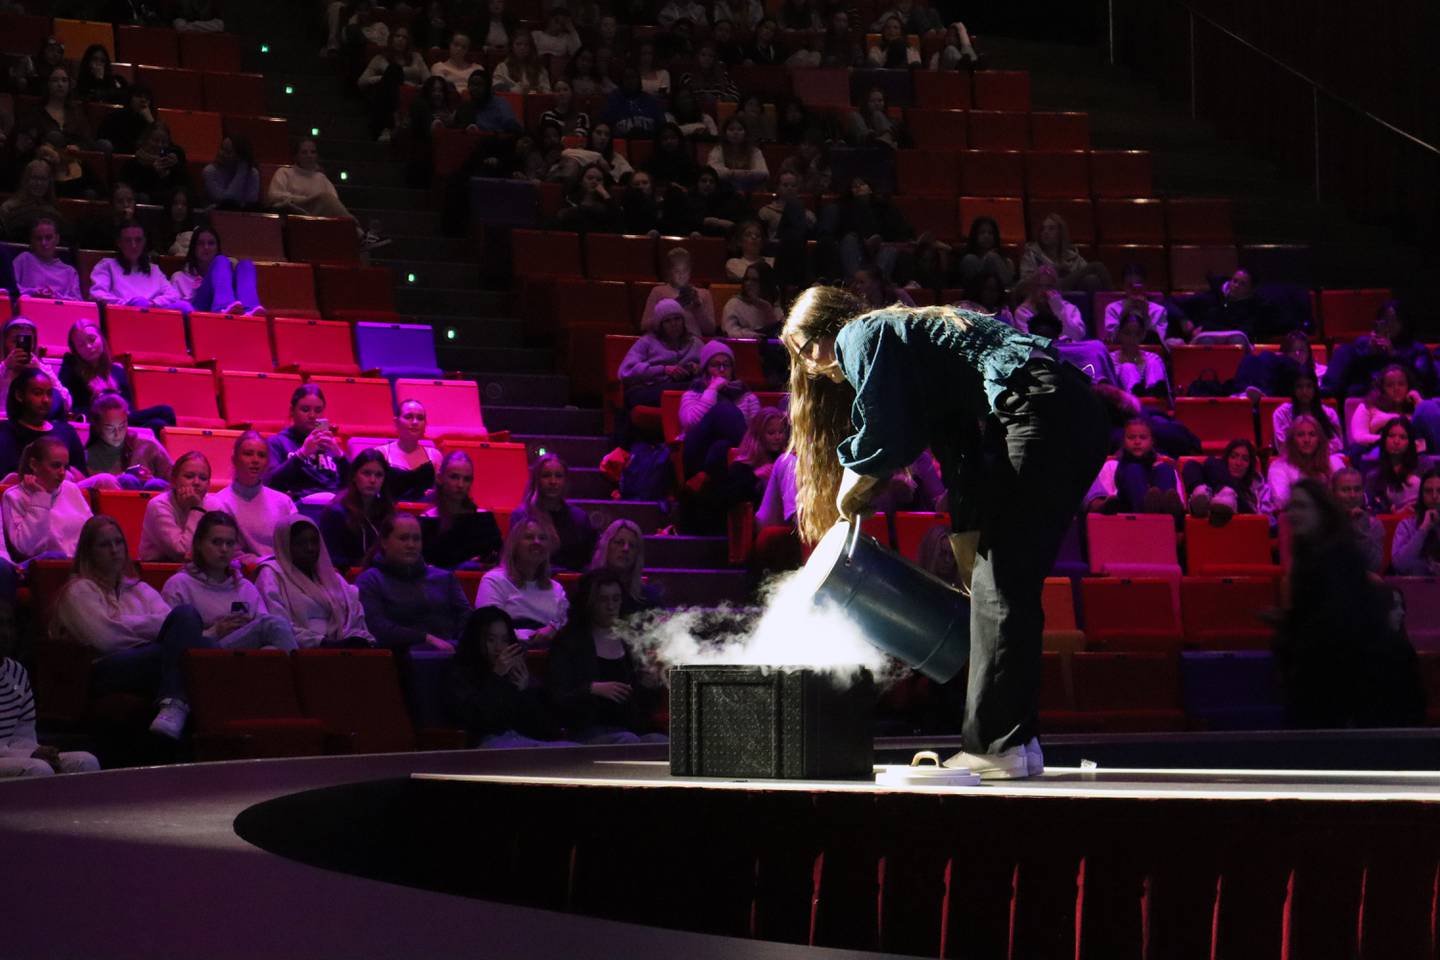 Girl containing transparent liquid nitrogen in a box on the string.